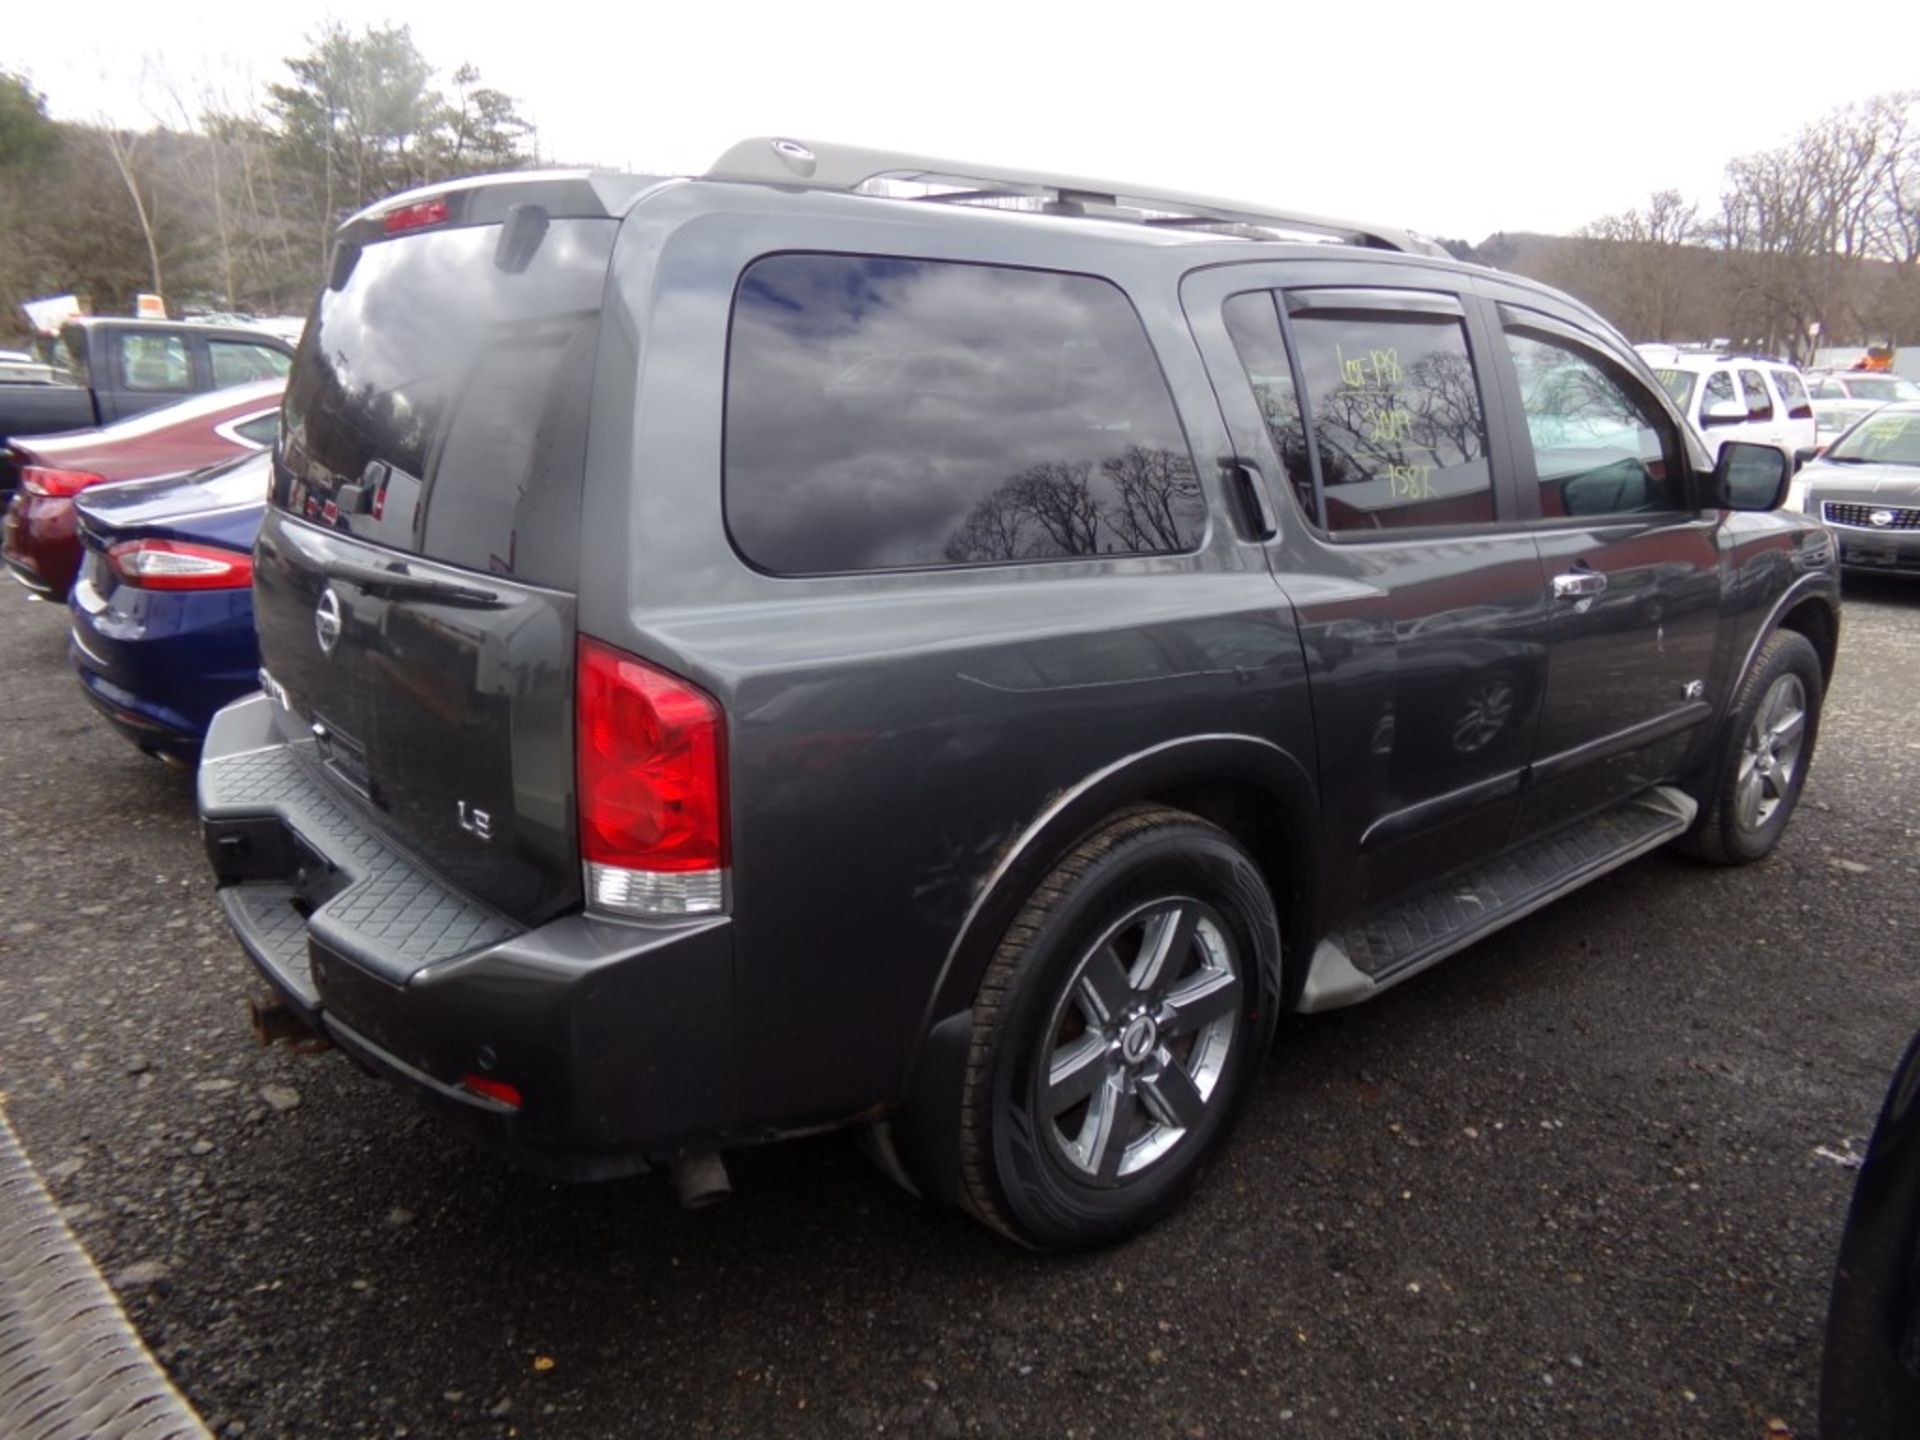 2009 Nissan Armada LE 4X4, Leather, Sunroof, 3rd Row Seating, Grey, 158,581 Miles, VIN# - Image 7 of 13